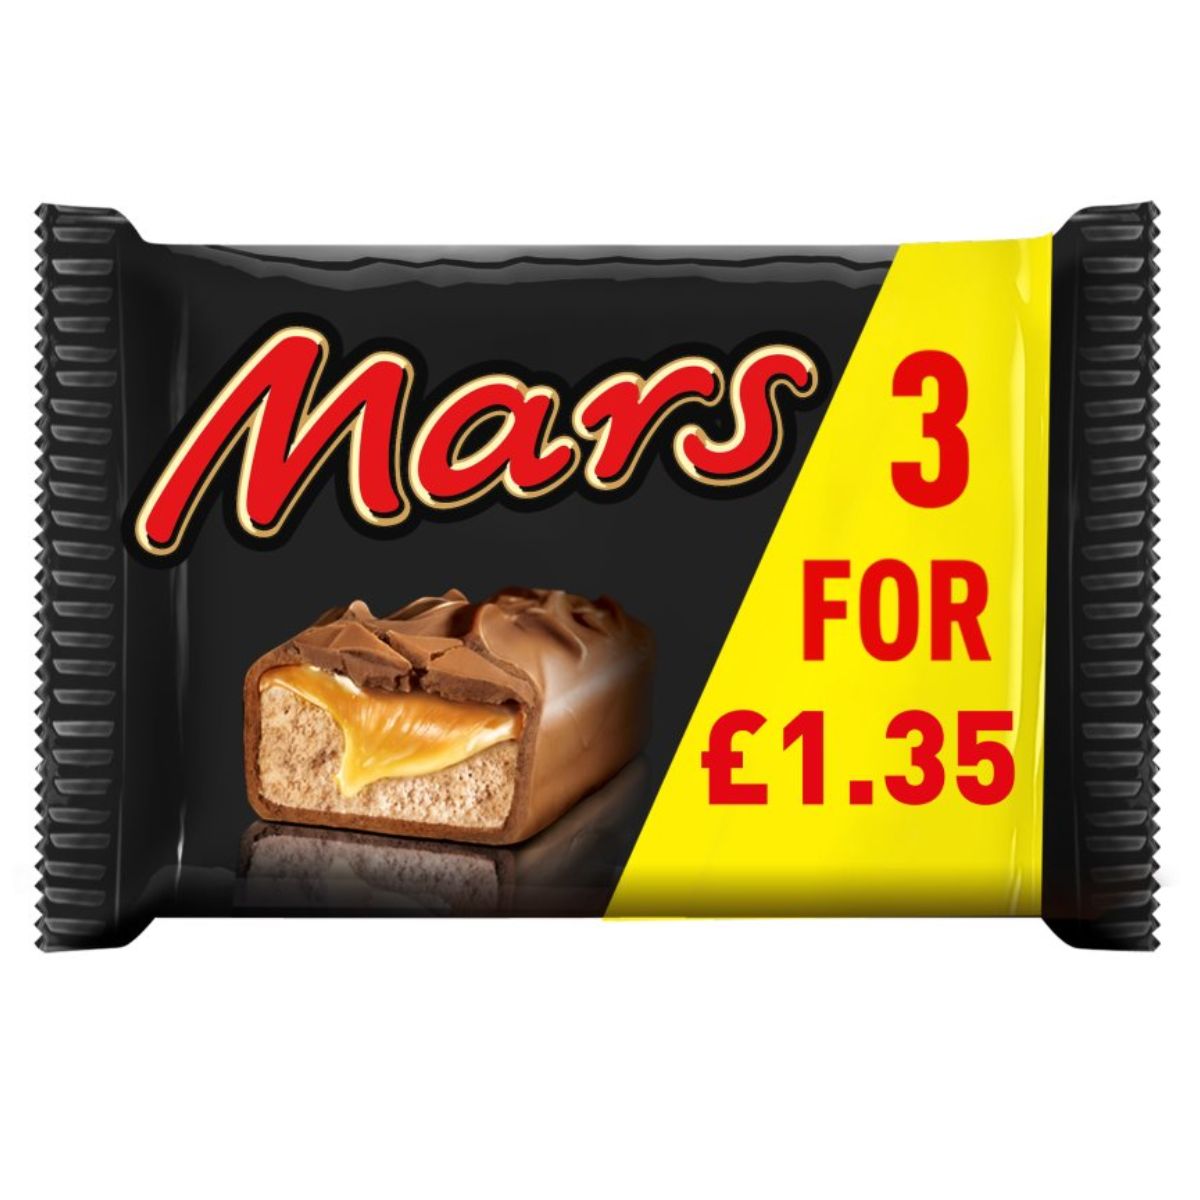 Pack of Mars -Chocolate Snack Bars Multipack - 3 x 39.4g showing a promotional label "3 for £1.35" with a cross-section of the bar revealing caramel and nougat layers.